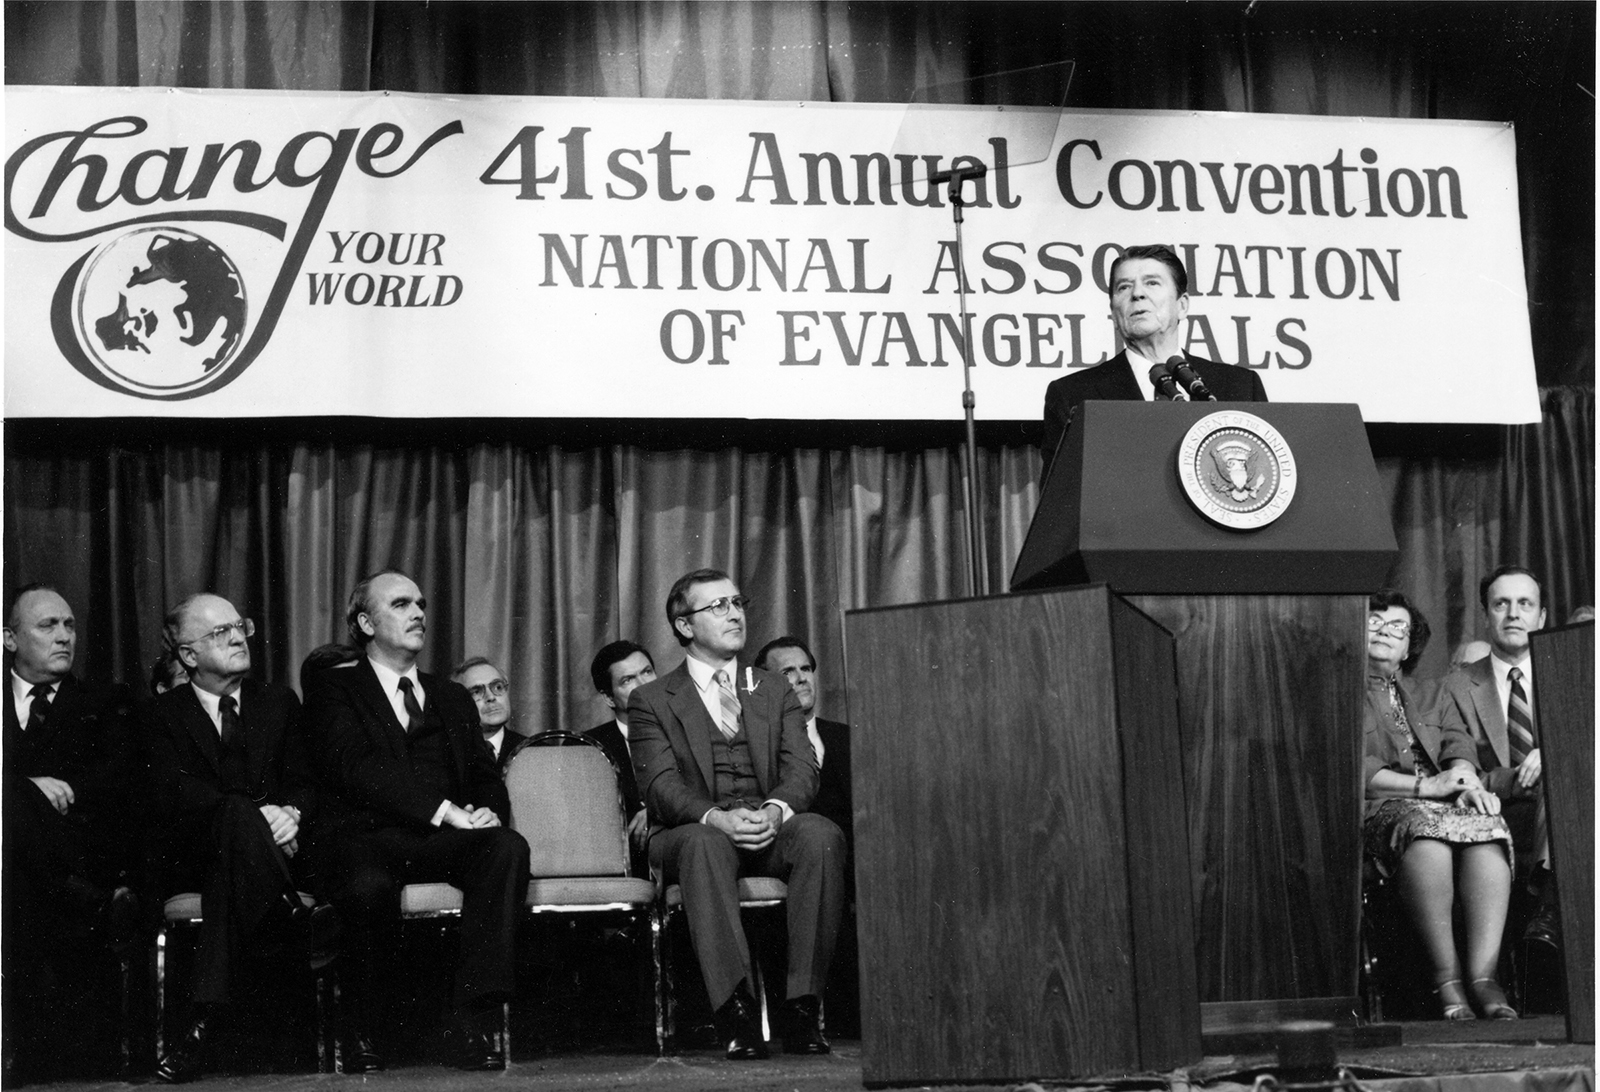 President Ronald Reagan addresses the Annual Convention of the National Association of Evangelicals on March 8, 1983, in Orlando, Florida. NAE President Arthur Gay is seated left of Reagan, with glasses. Courtesy photo